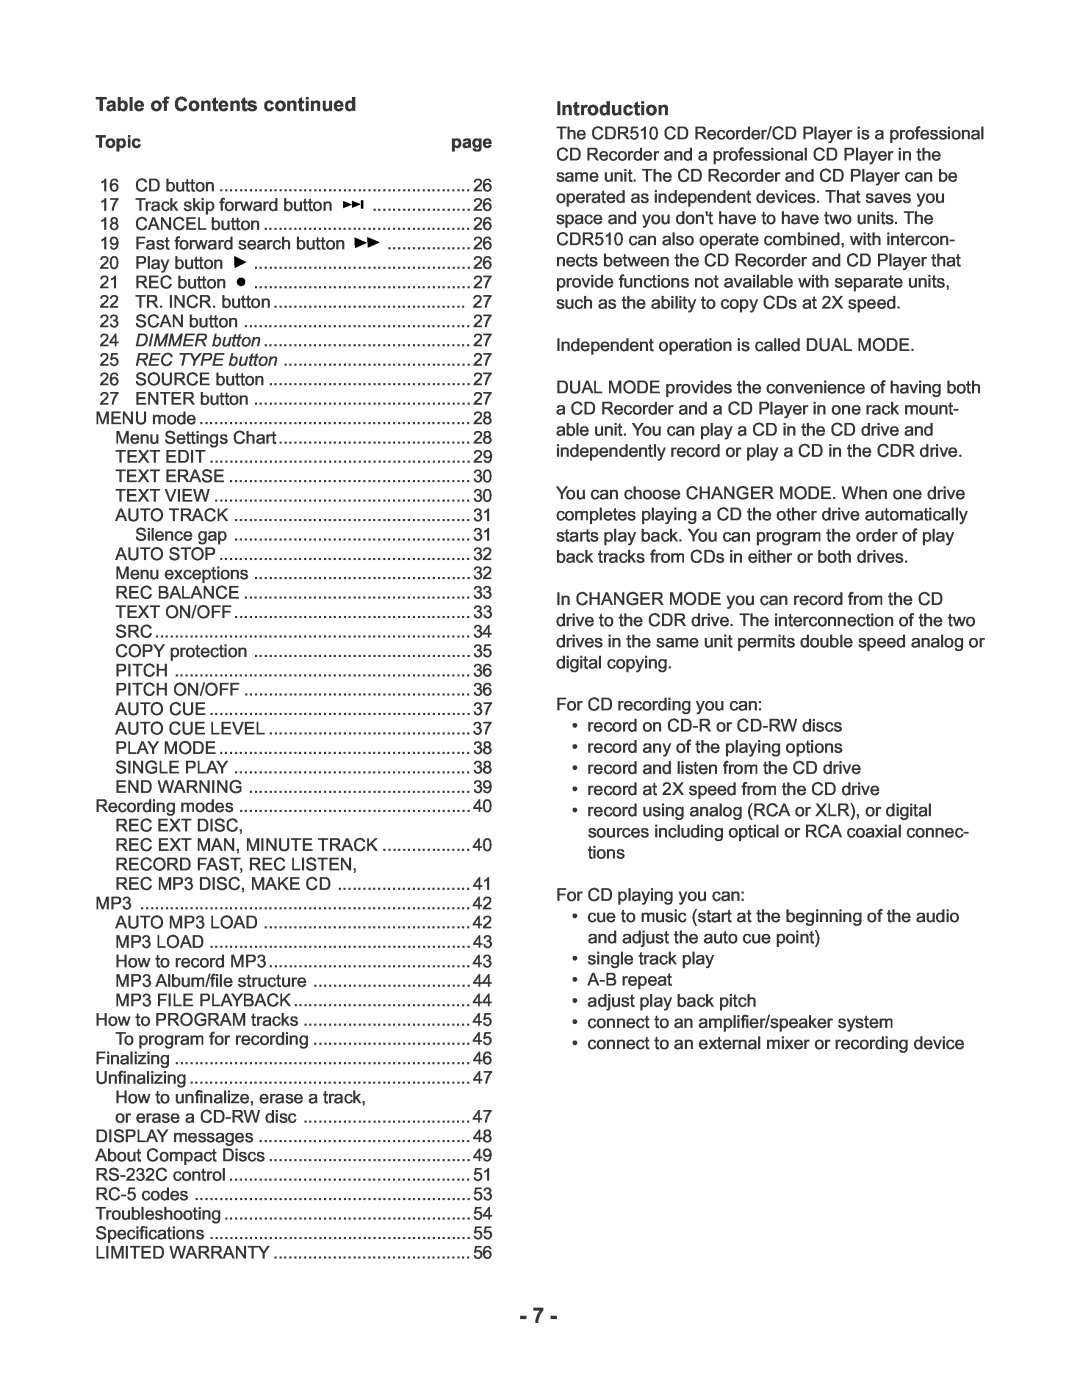 Marantz CDR510 manual Table of Contents continued, Introduction 